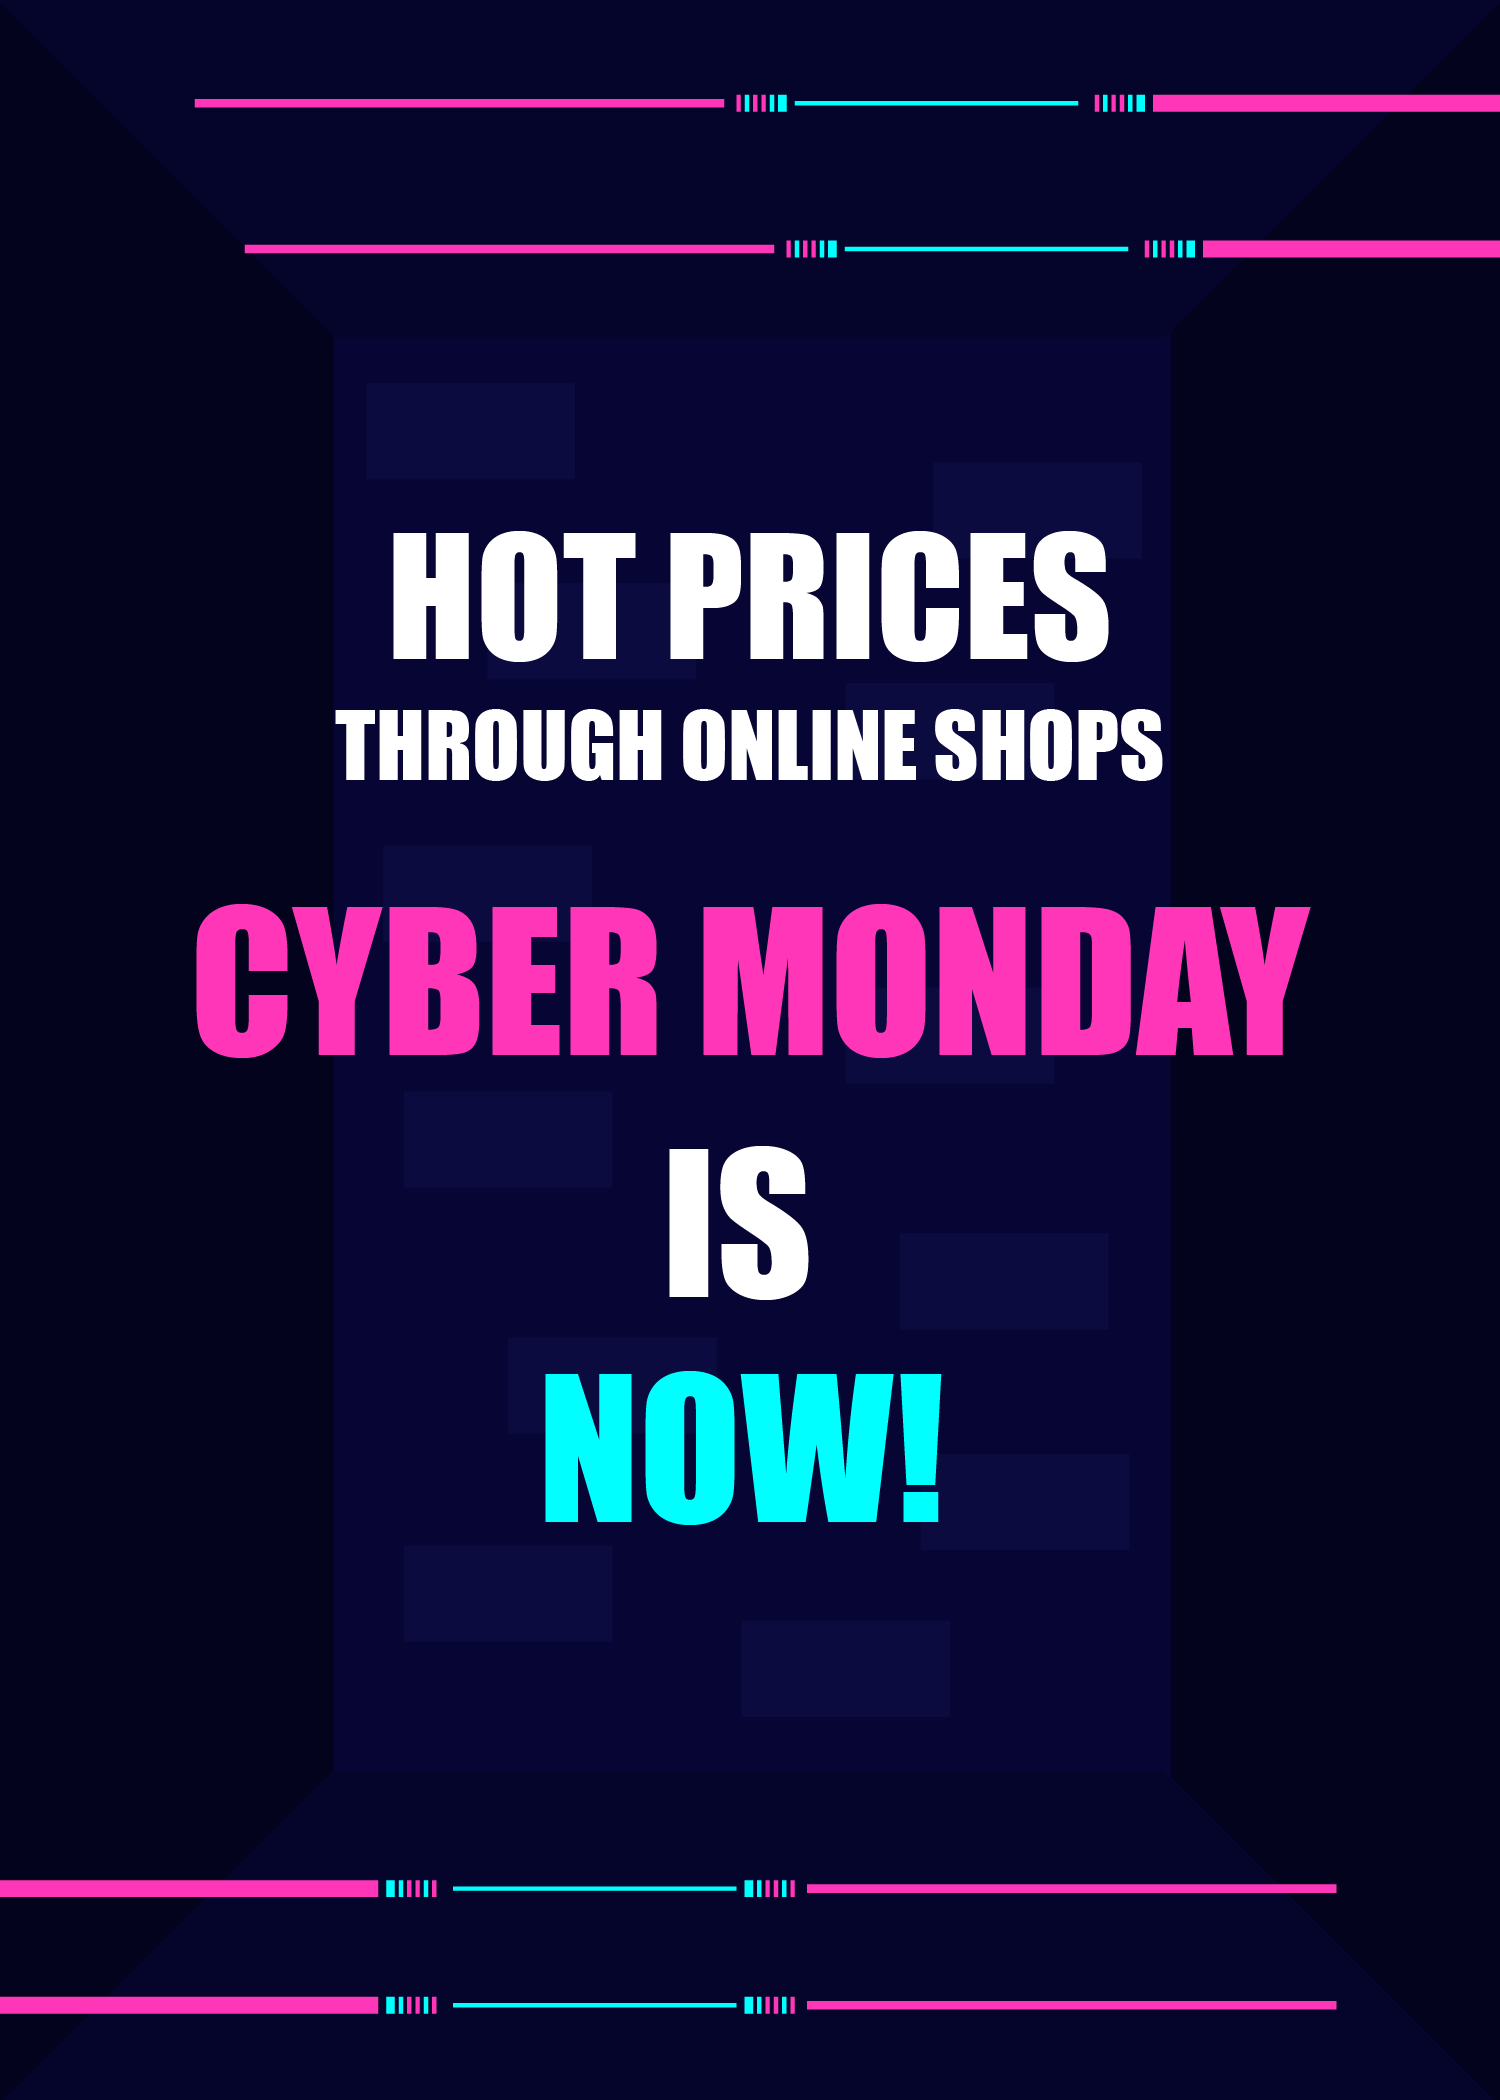 FREE Cyber Monday Poster Word - Template Download | Template.net